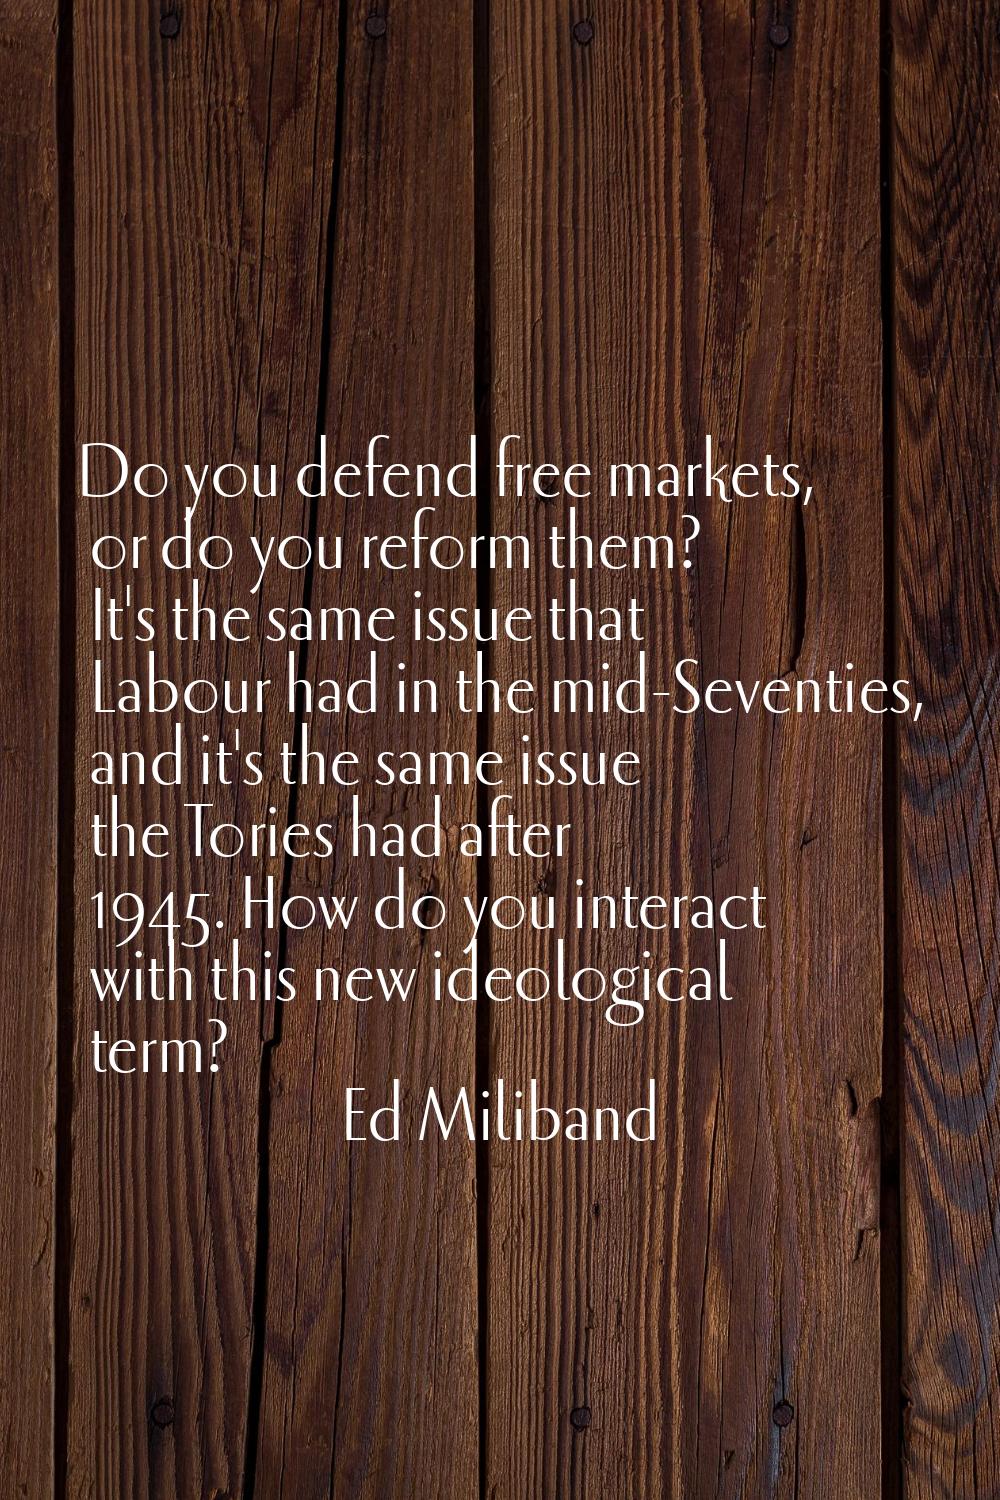 Do you defend free markets, or do you reform them? It's the same issue that Labour had in the mid-S